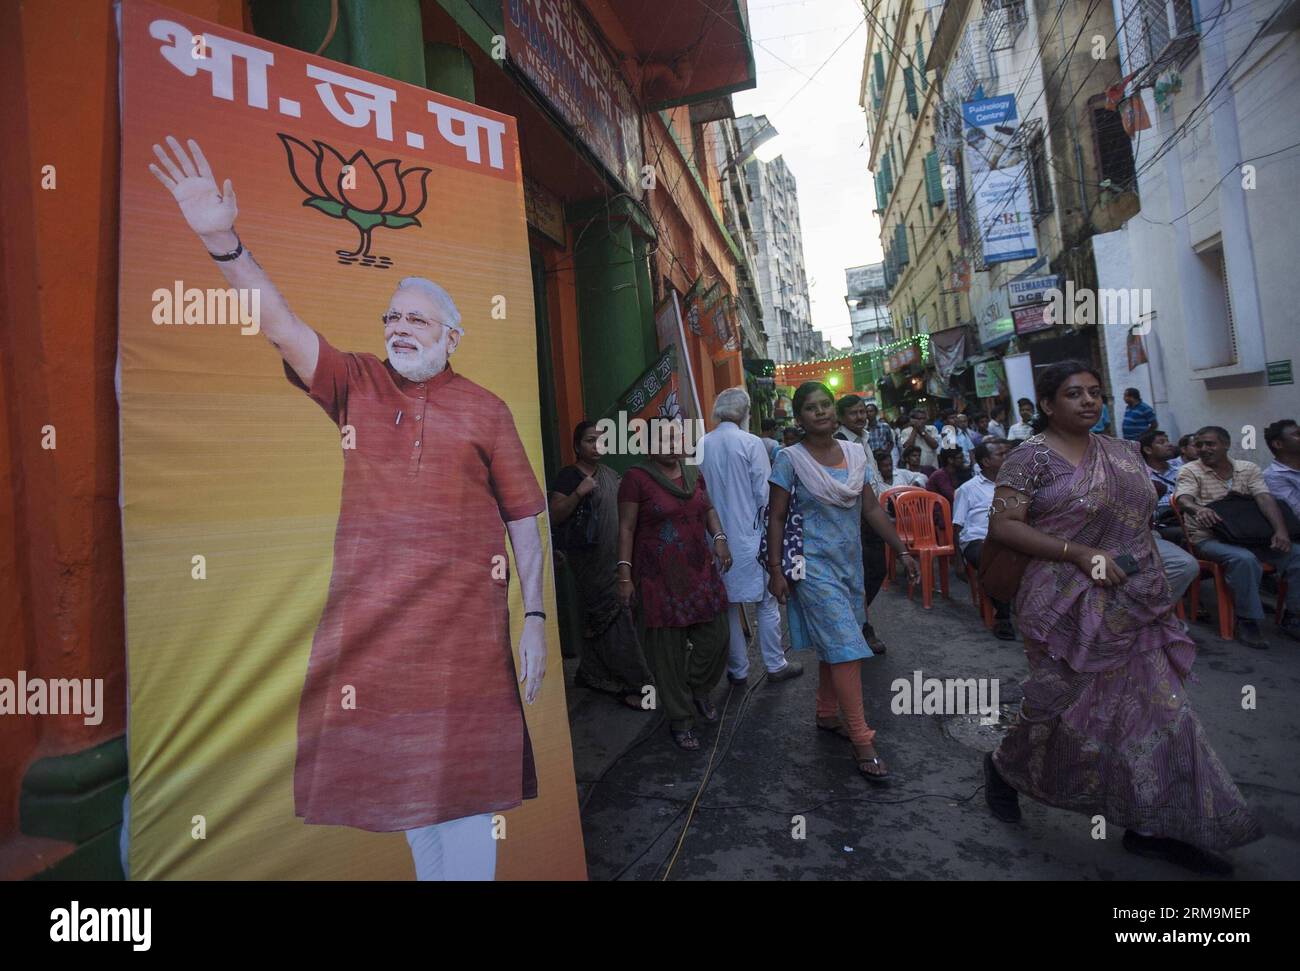 CALCUTTA, May 26, 2014 - Supporters of Indian Bharatiya Janata Party (BJP) gather to watch the oath taking ceremony of Narendra Modi as India s 15th prime minister in Calcutta, capital of eastern Indian state West Bengal, May 26, 2014. Narendra Modi, the son of a tea-seller, on Monday created history by becoming Indian new prime minister in a grand ceremony attended by his counterpart from arch- rival Pakistan, along with heads of state of other South Asian nations. (Xinhua/Tumpa Mondal) INDIA-CALCUTTA-MODI-CEREMONY PUBLICATIONxNOTxINxCHN   Calcutta May 26 2014 Supporters of Indian Bharatiya J Stock Photo